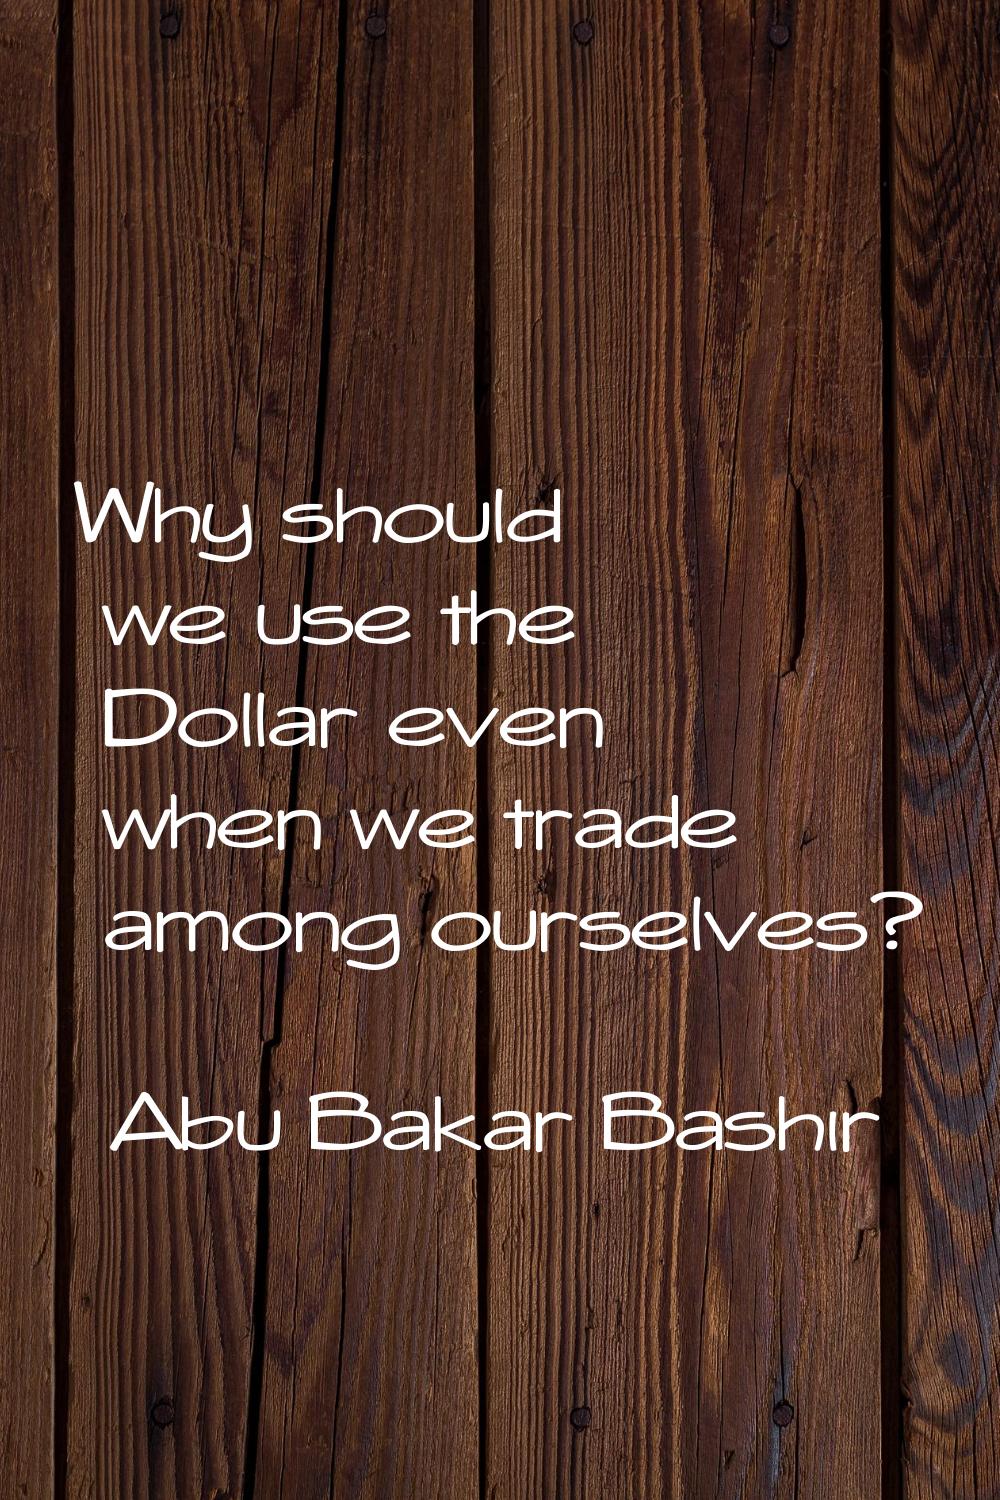 Why should we use the Dollar even when we trade among ourselves?